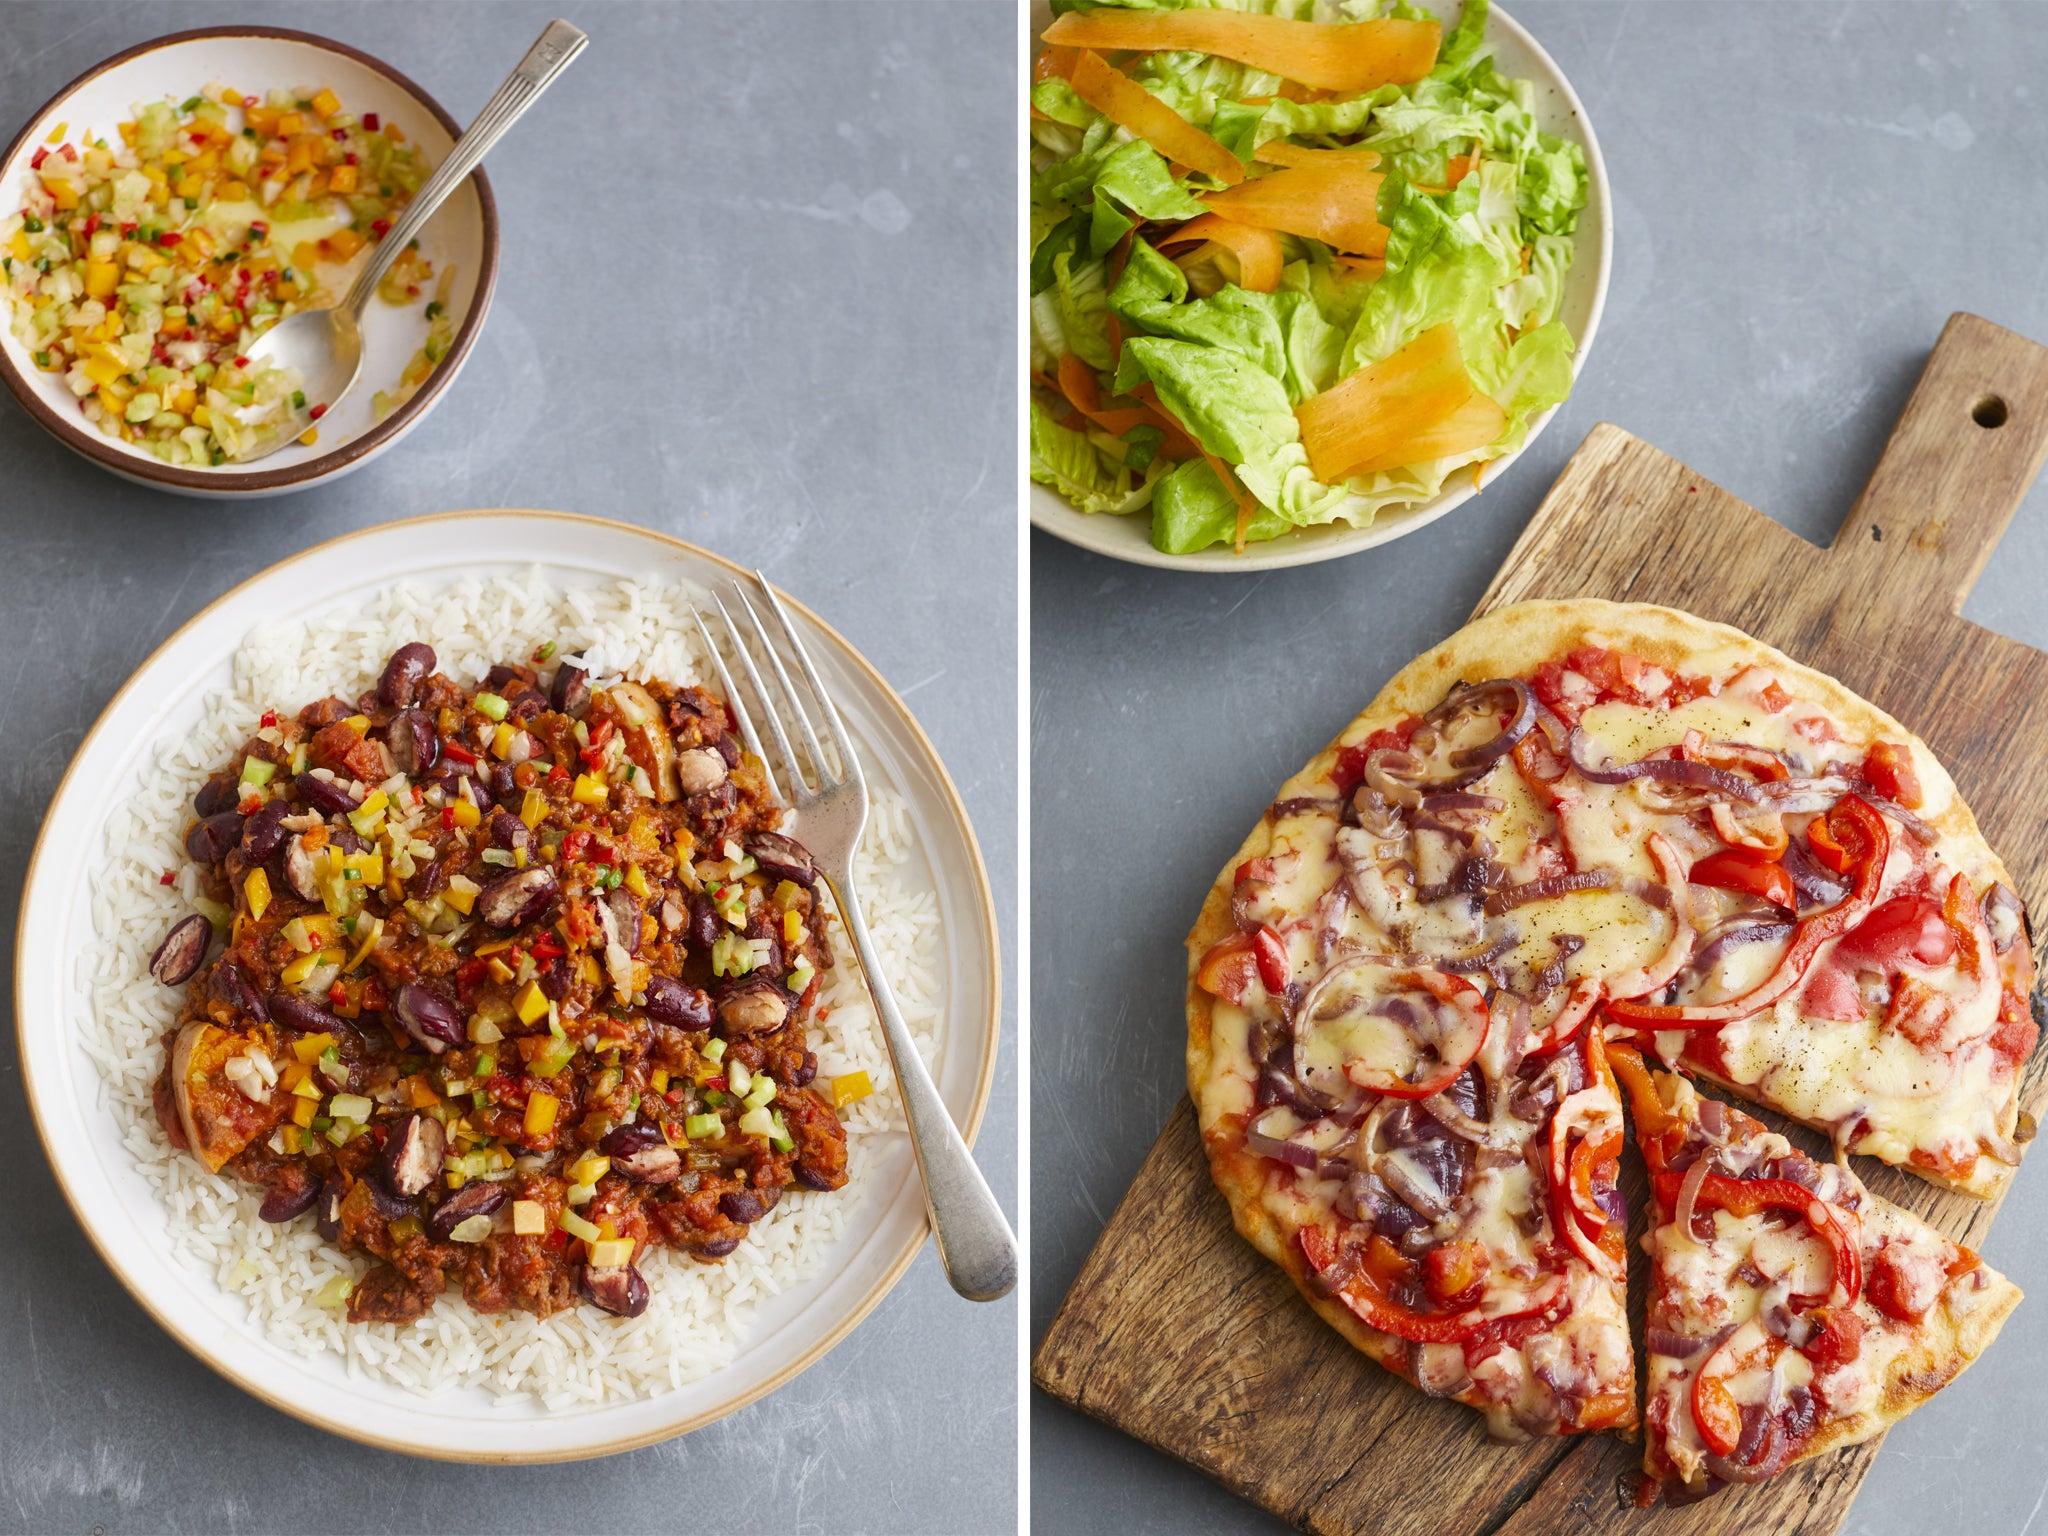 You won’t need the oven for this microwave chilli con carne or frying pan pizza